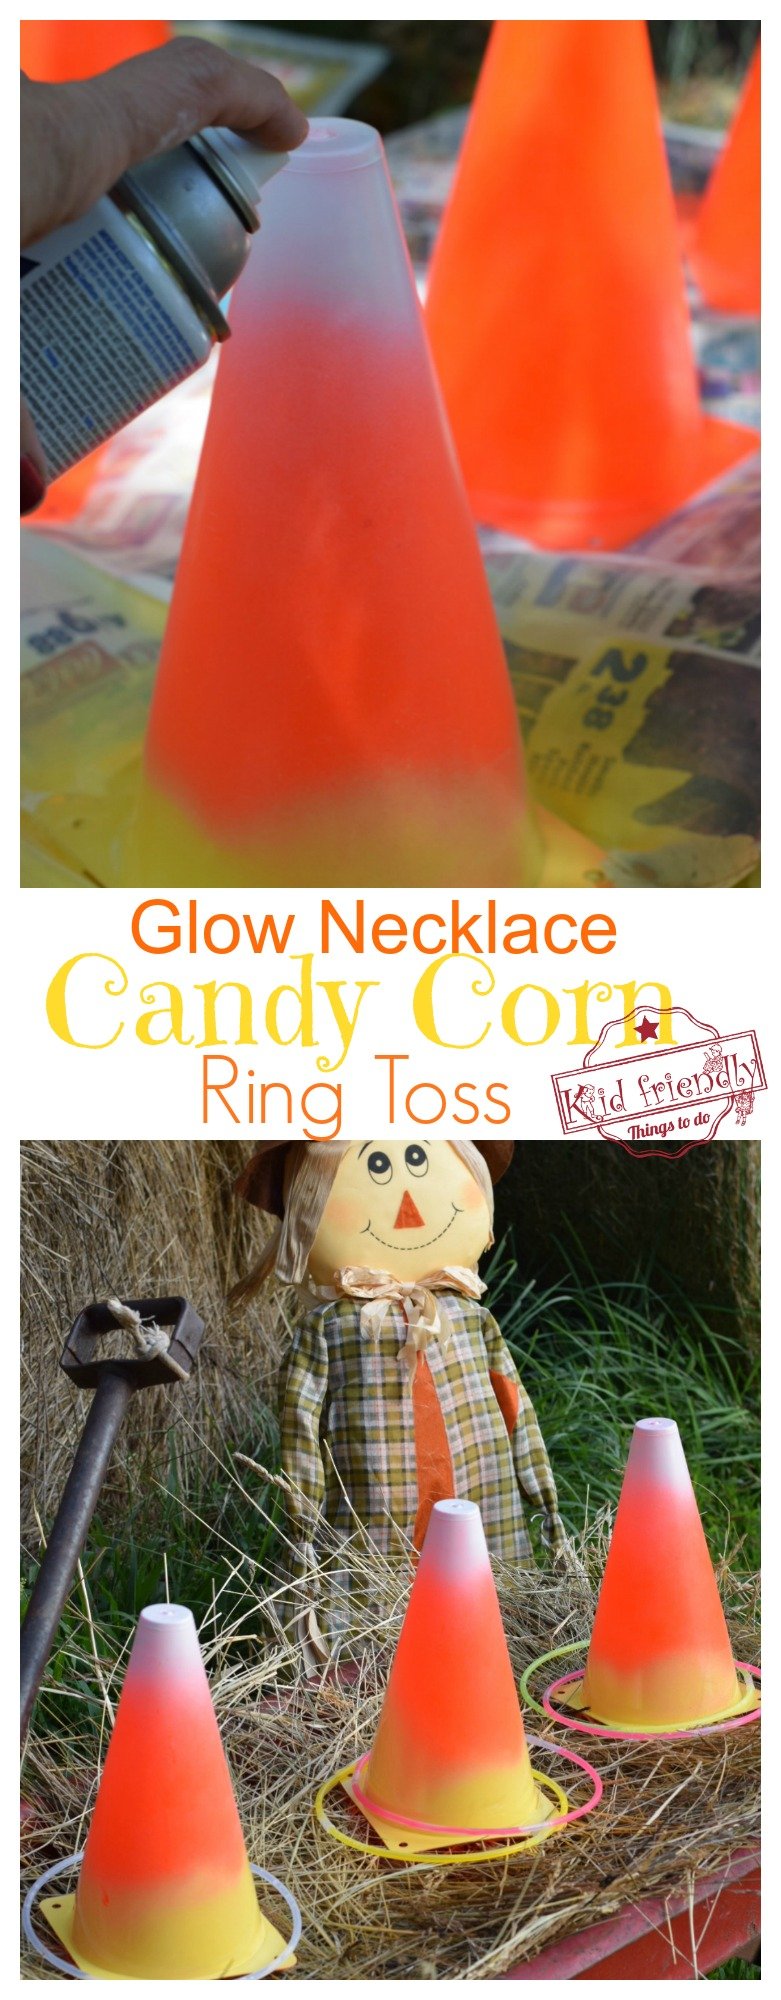 Easy DIY Candy Corn Ring Toss with Glow Necklaces for a Fun Fall, Halloween, or Thanksgiving Game - perfect for kid's school party, harvest parties, or family fun! www.kidfriendlythingstodo.com